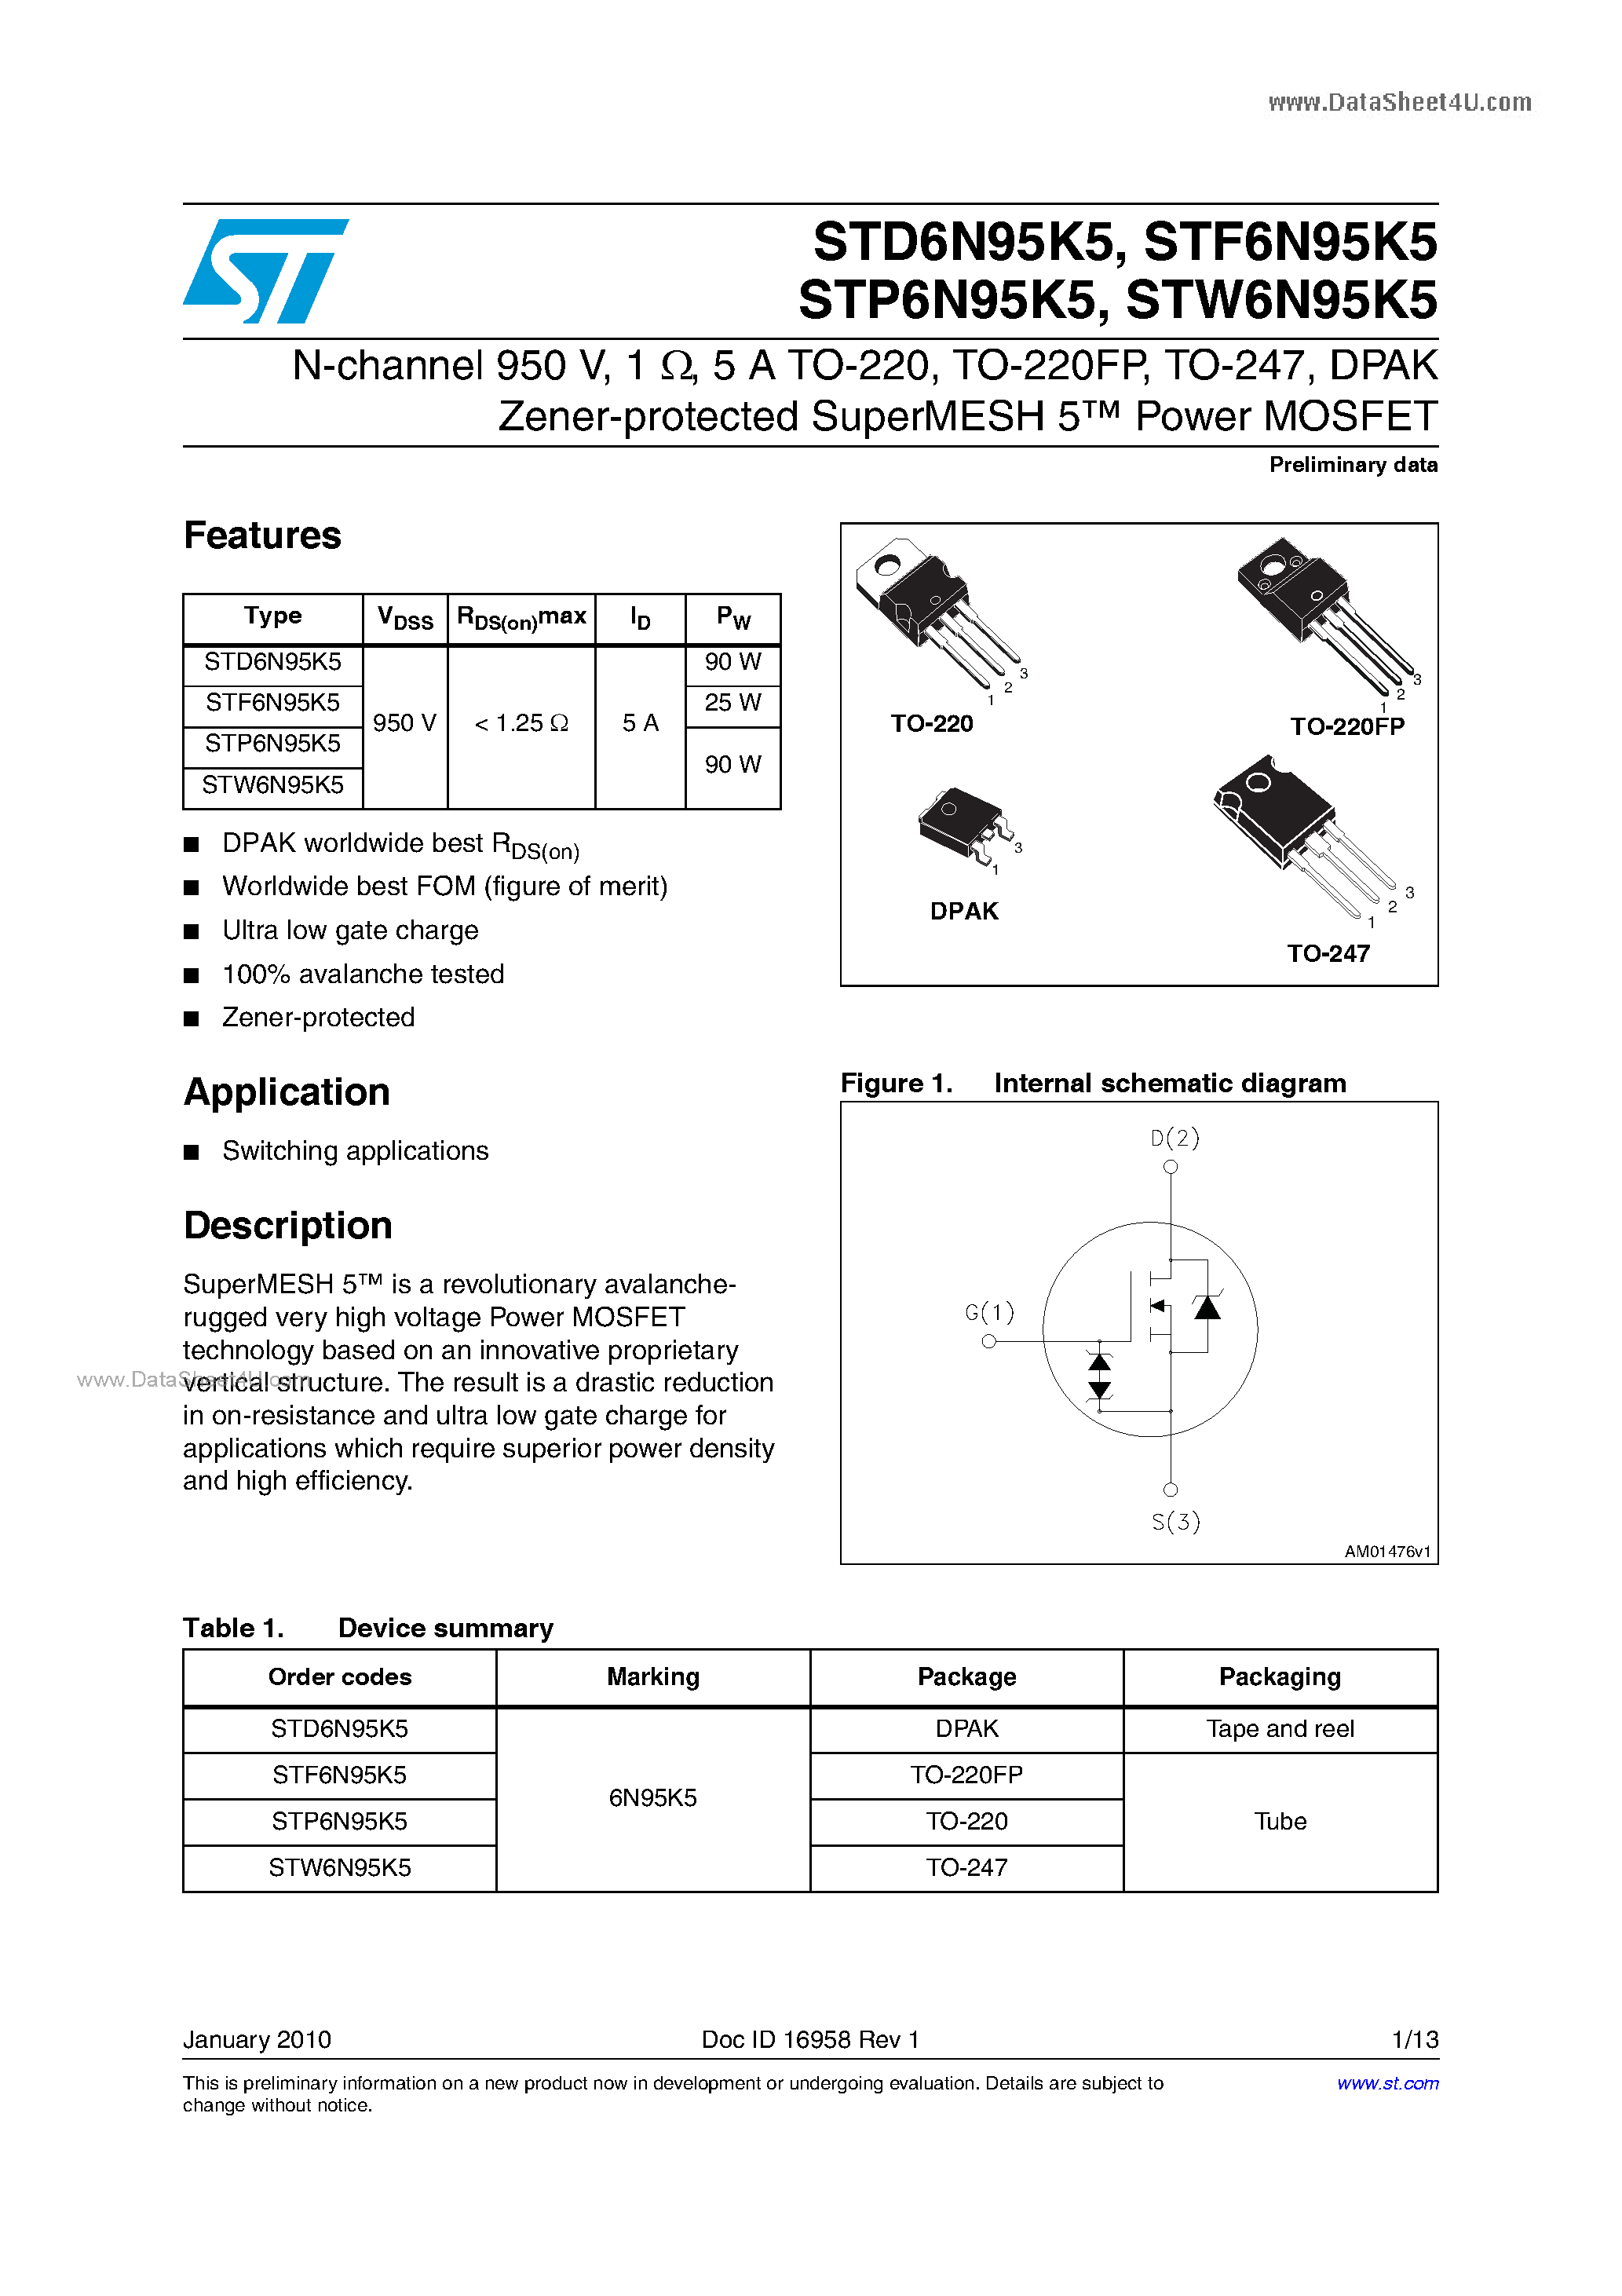 Datasheet STP6N95K5 - Power MOSFETs page 1